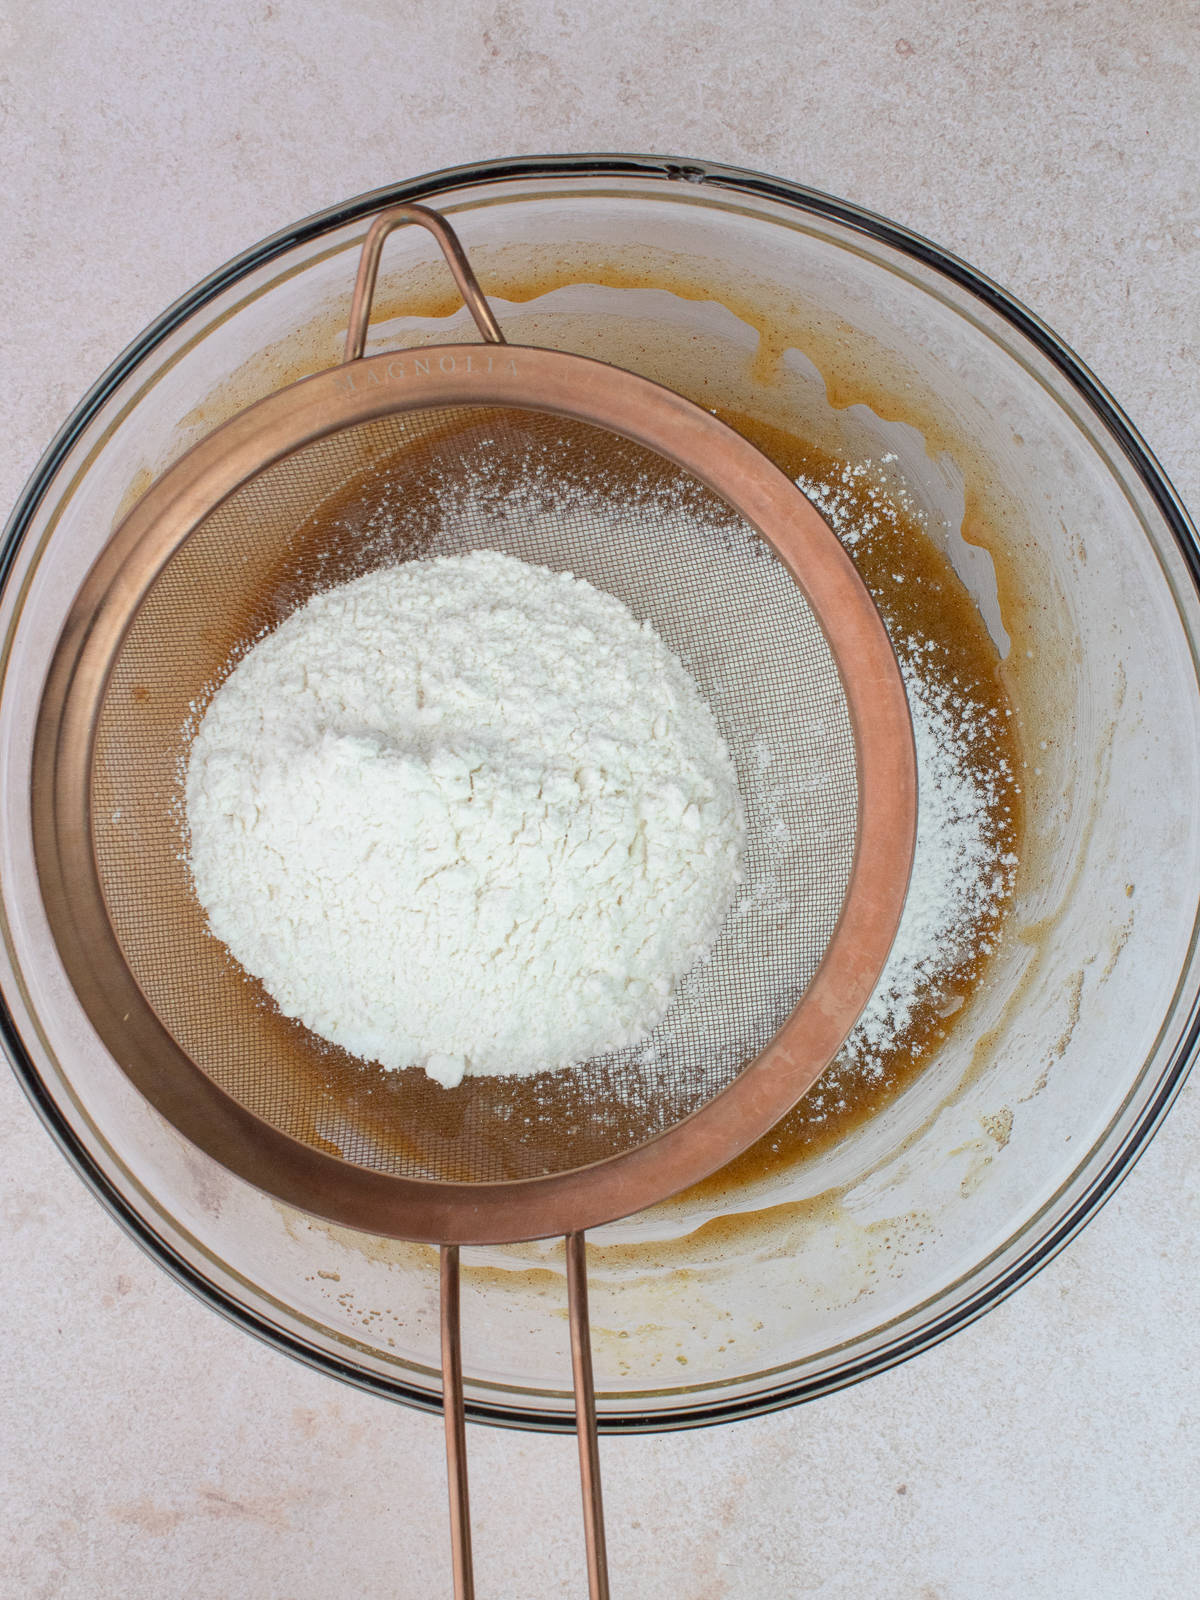 All-purpose flour, baking powder and salt are siftted into wet ingredients.